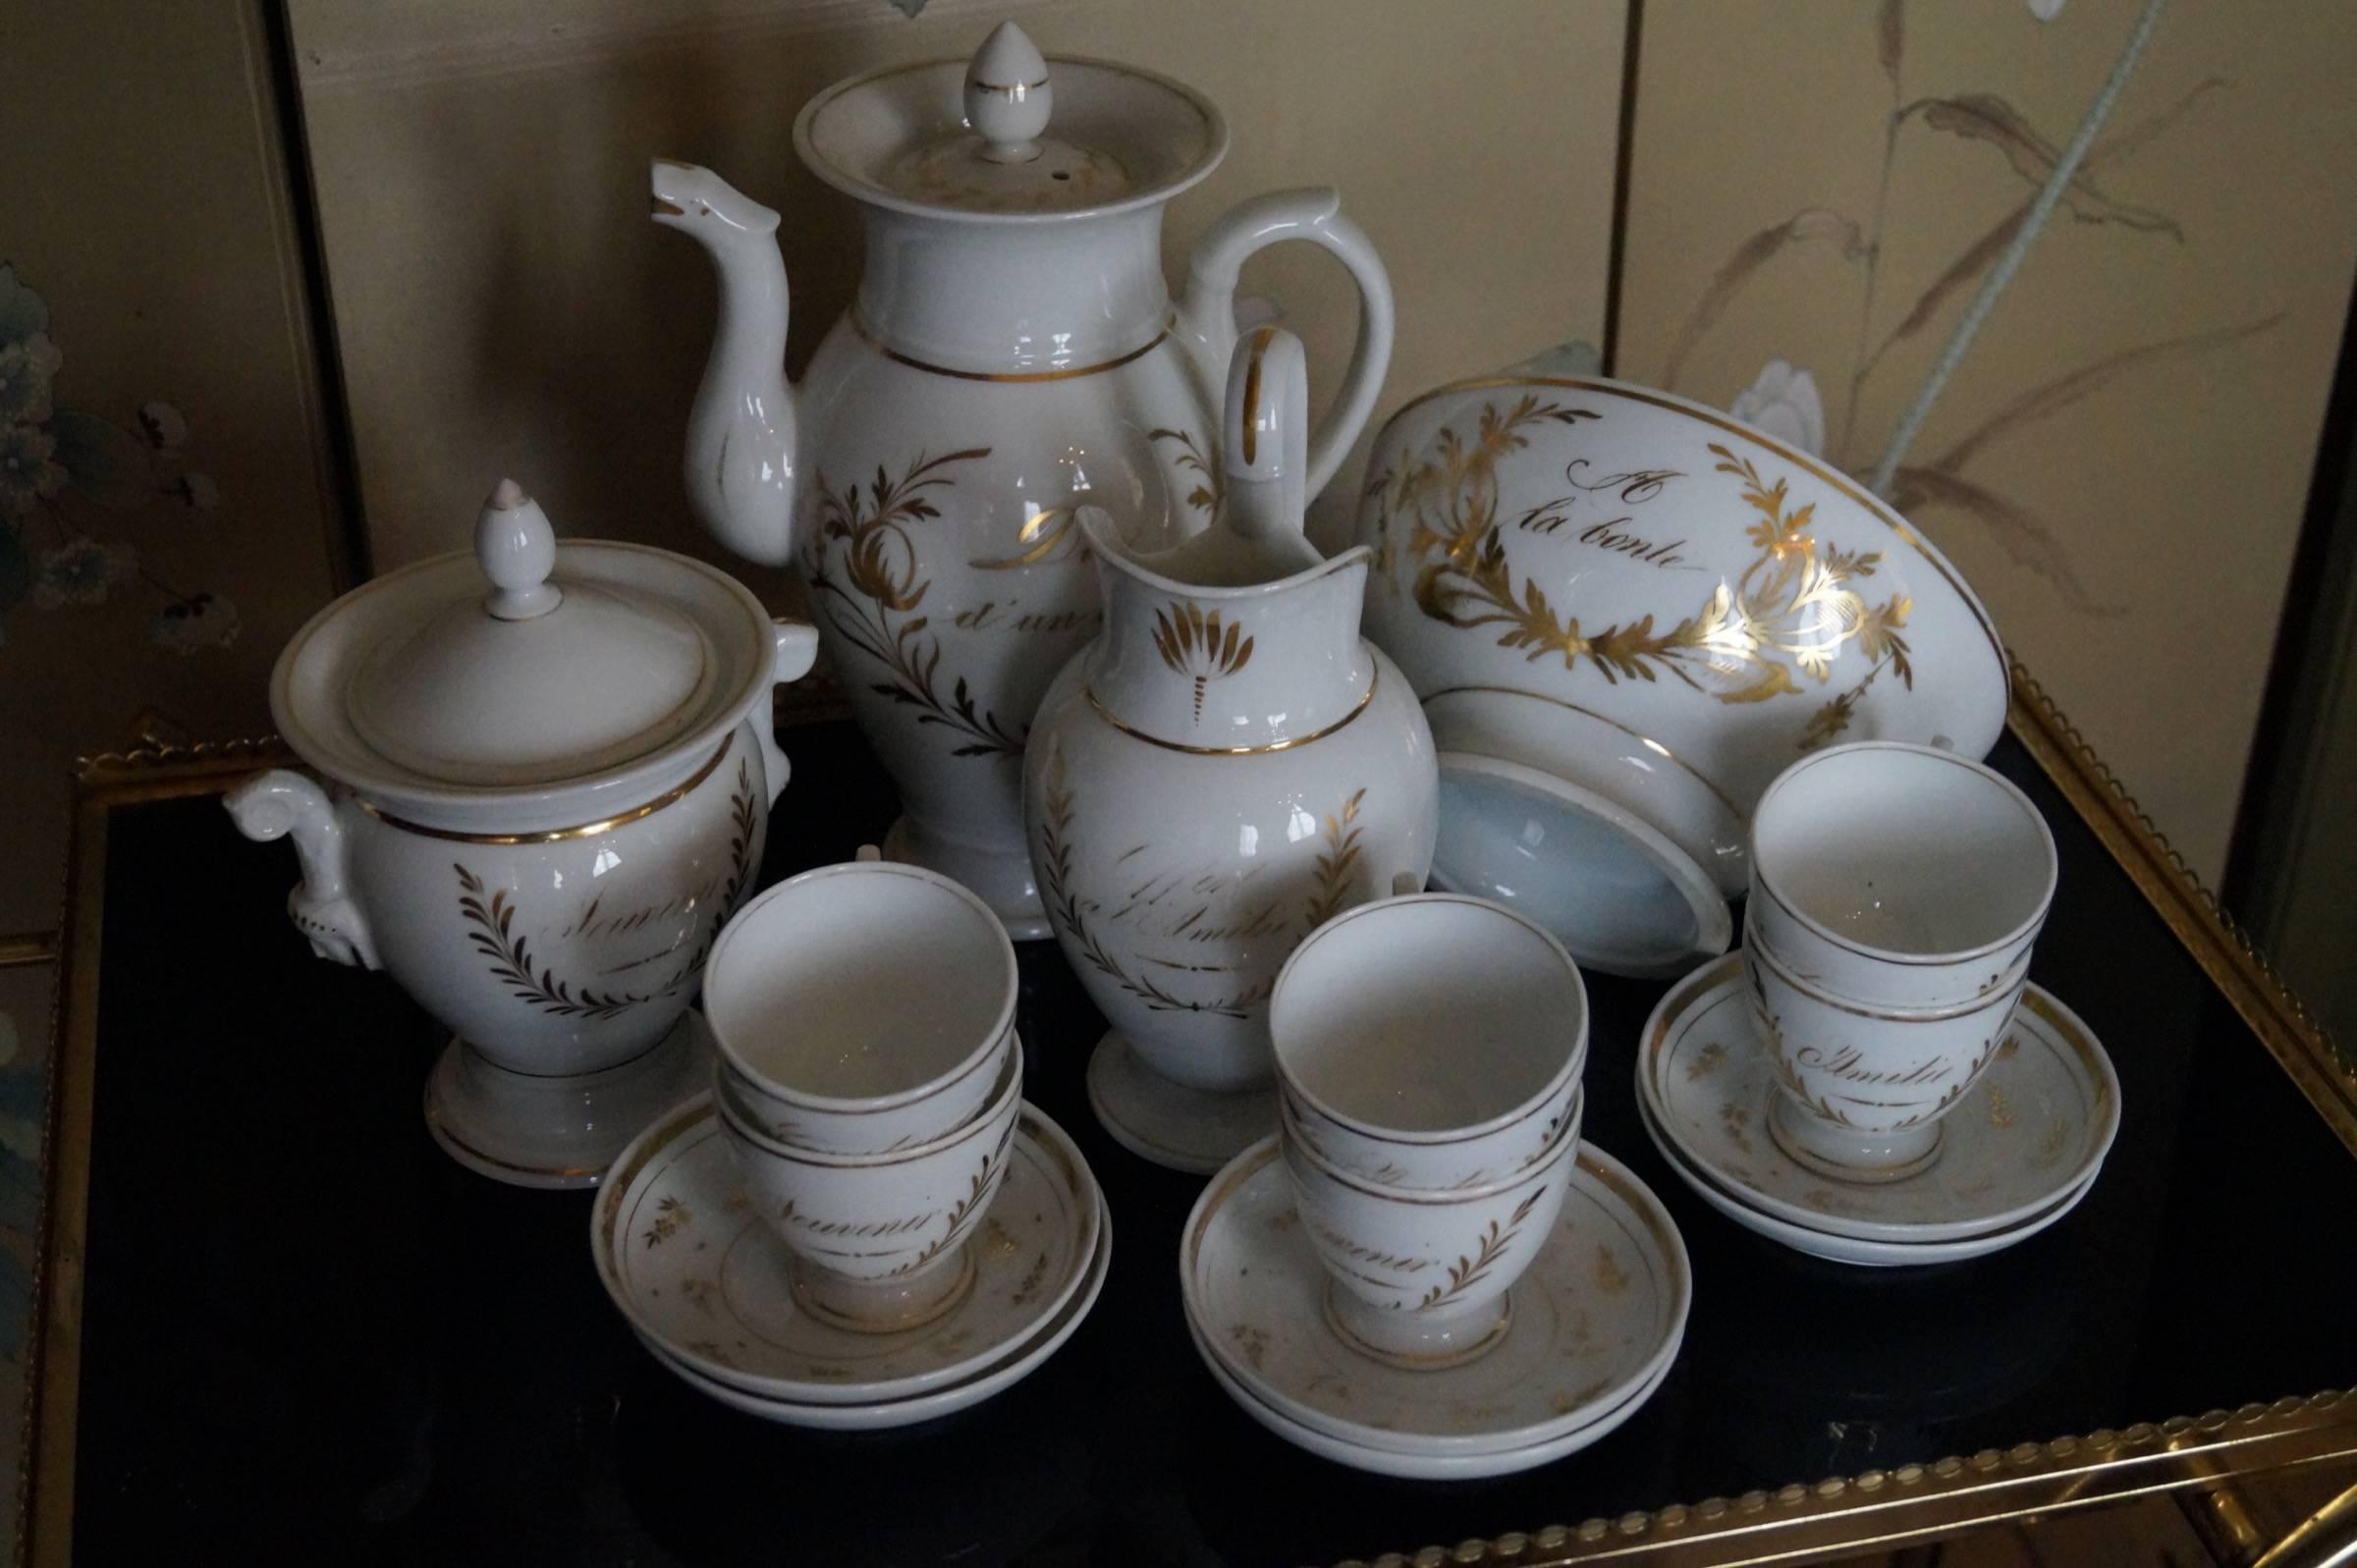 France porcelain, 1850-1880.
With text in gold.
The theme of the different texts is love.
Good condition. Some wear on the gold text

Measures: Height coffee pot 27.5cm.
Height sugar bowl 20cm.
Height Jug 21.5cm.
Diameter bowl 20cm.
Six cups height